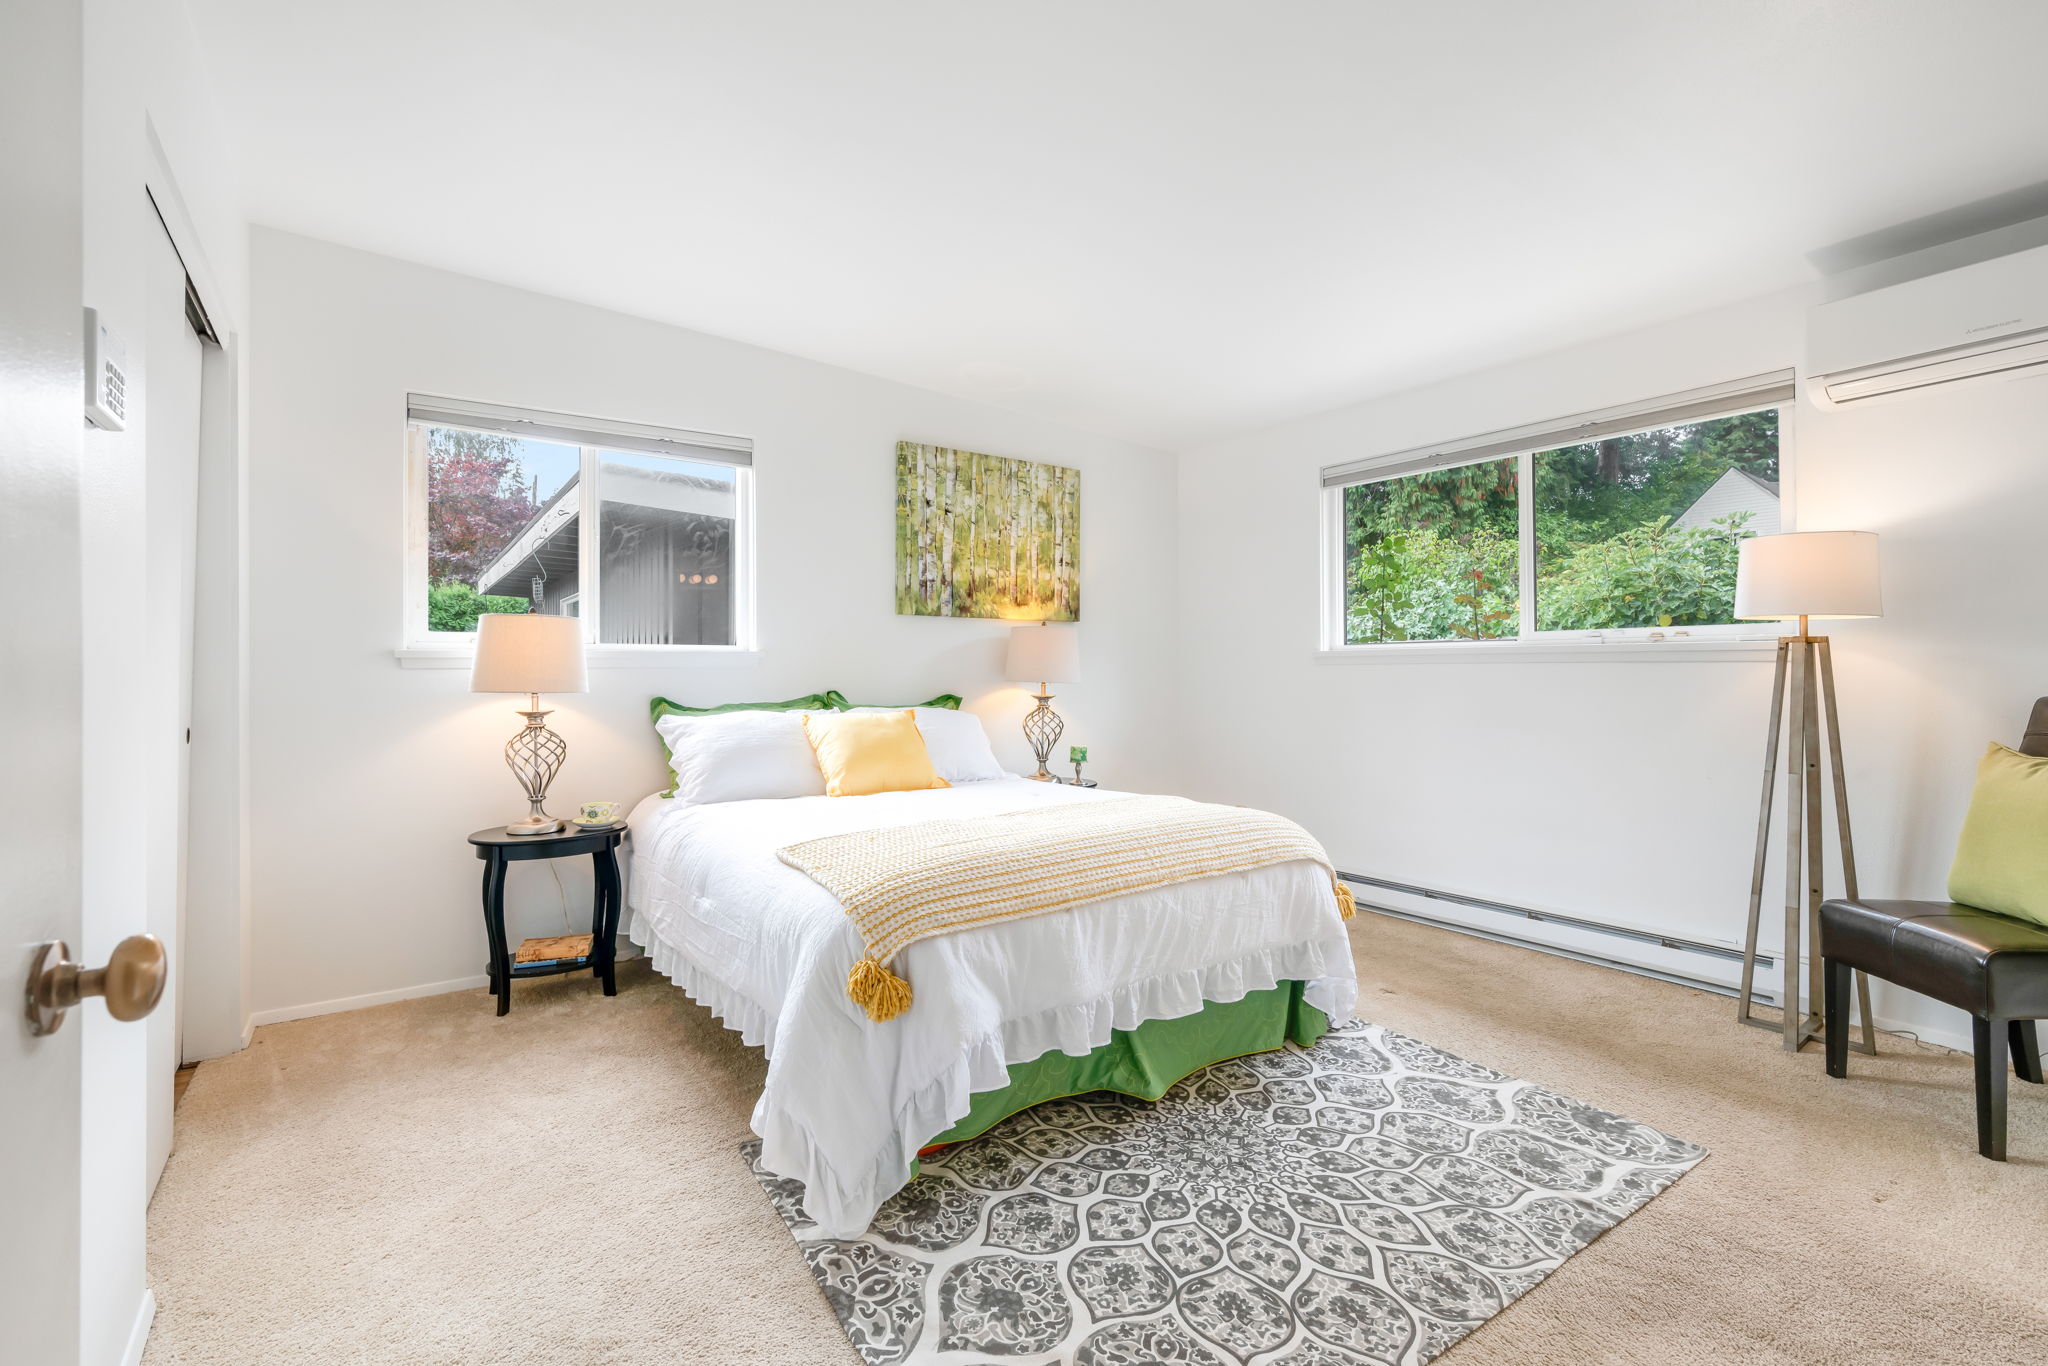 The spacious primary bedroom is a haven of comfort, featuring a double closet and a ductless mini split for year-round climate control.